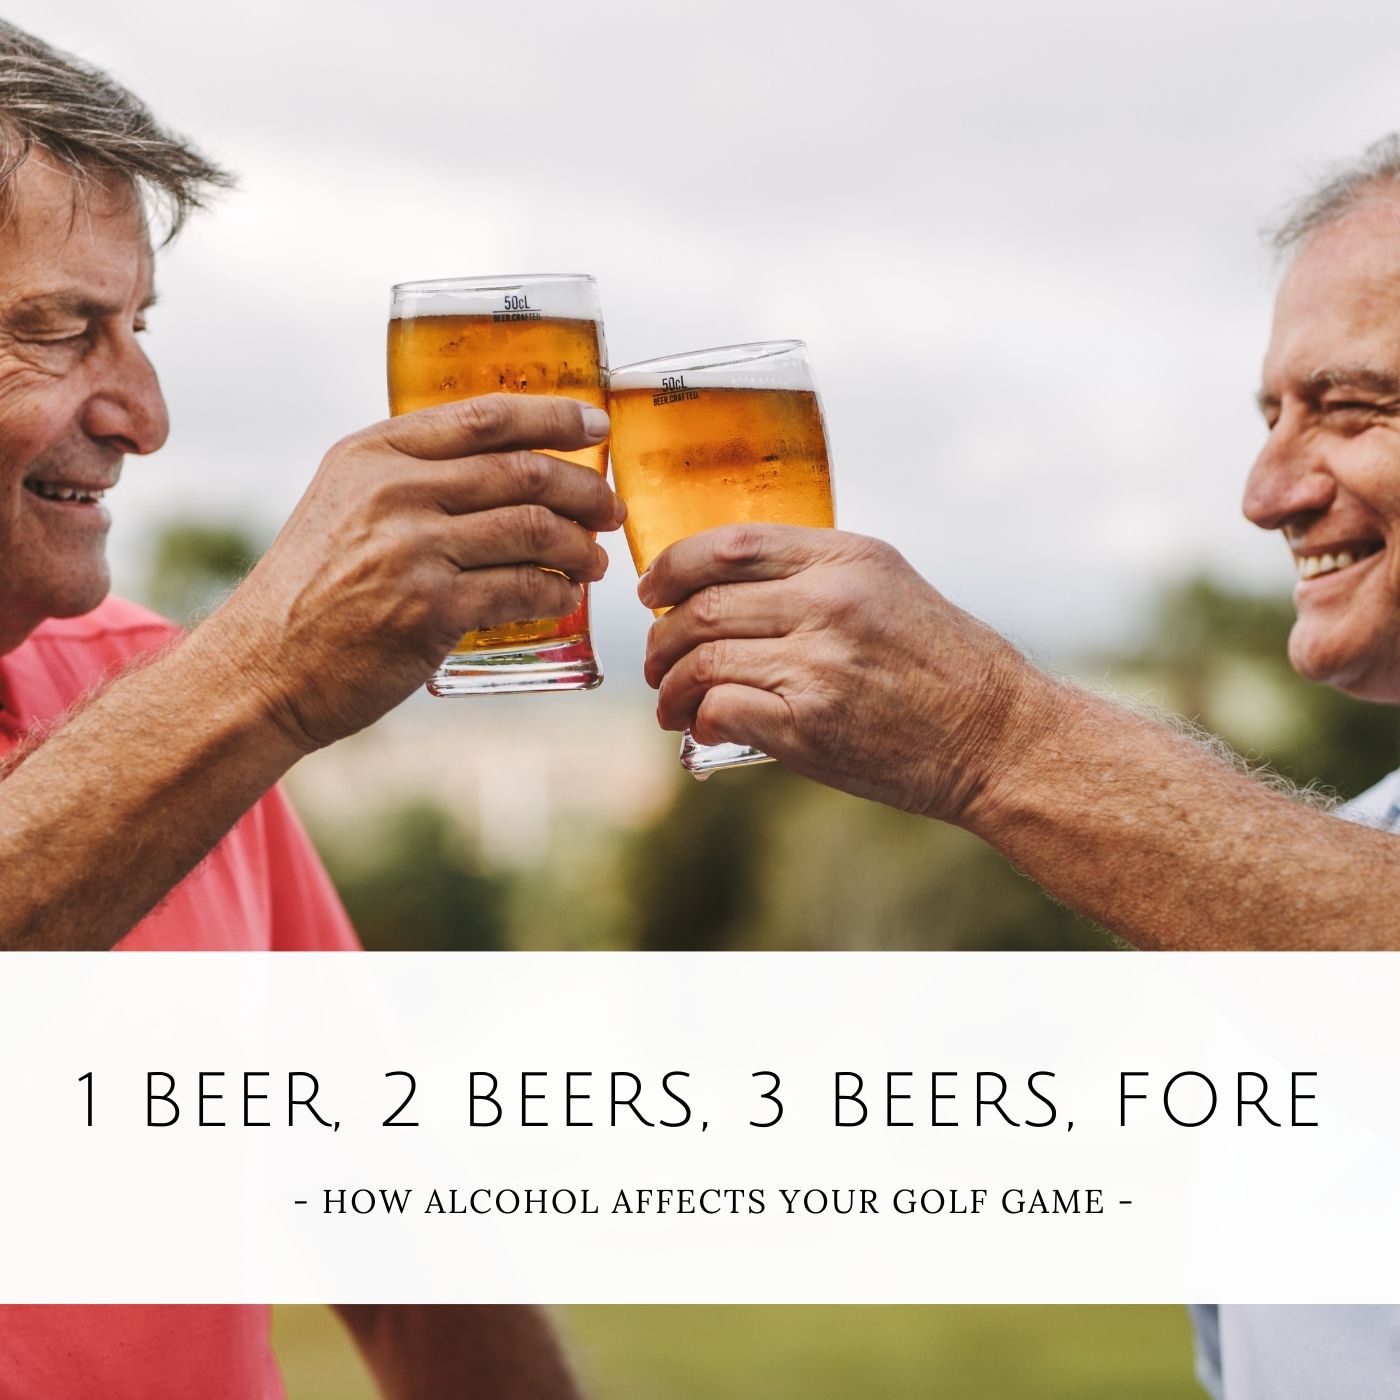 1 Beer, 2 Beer, 3 Beer, FORE! How Alcohol Affects Your Golf Game